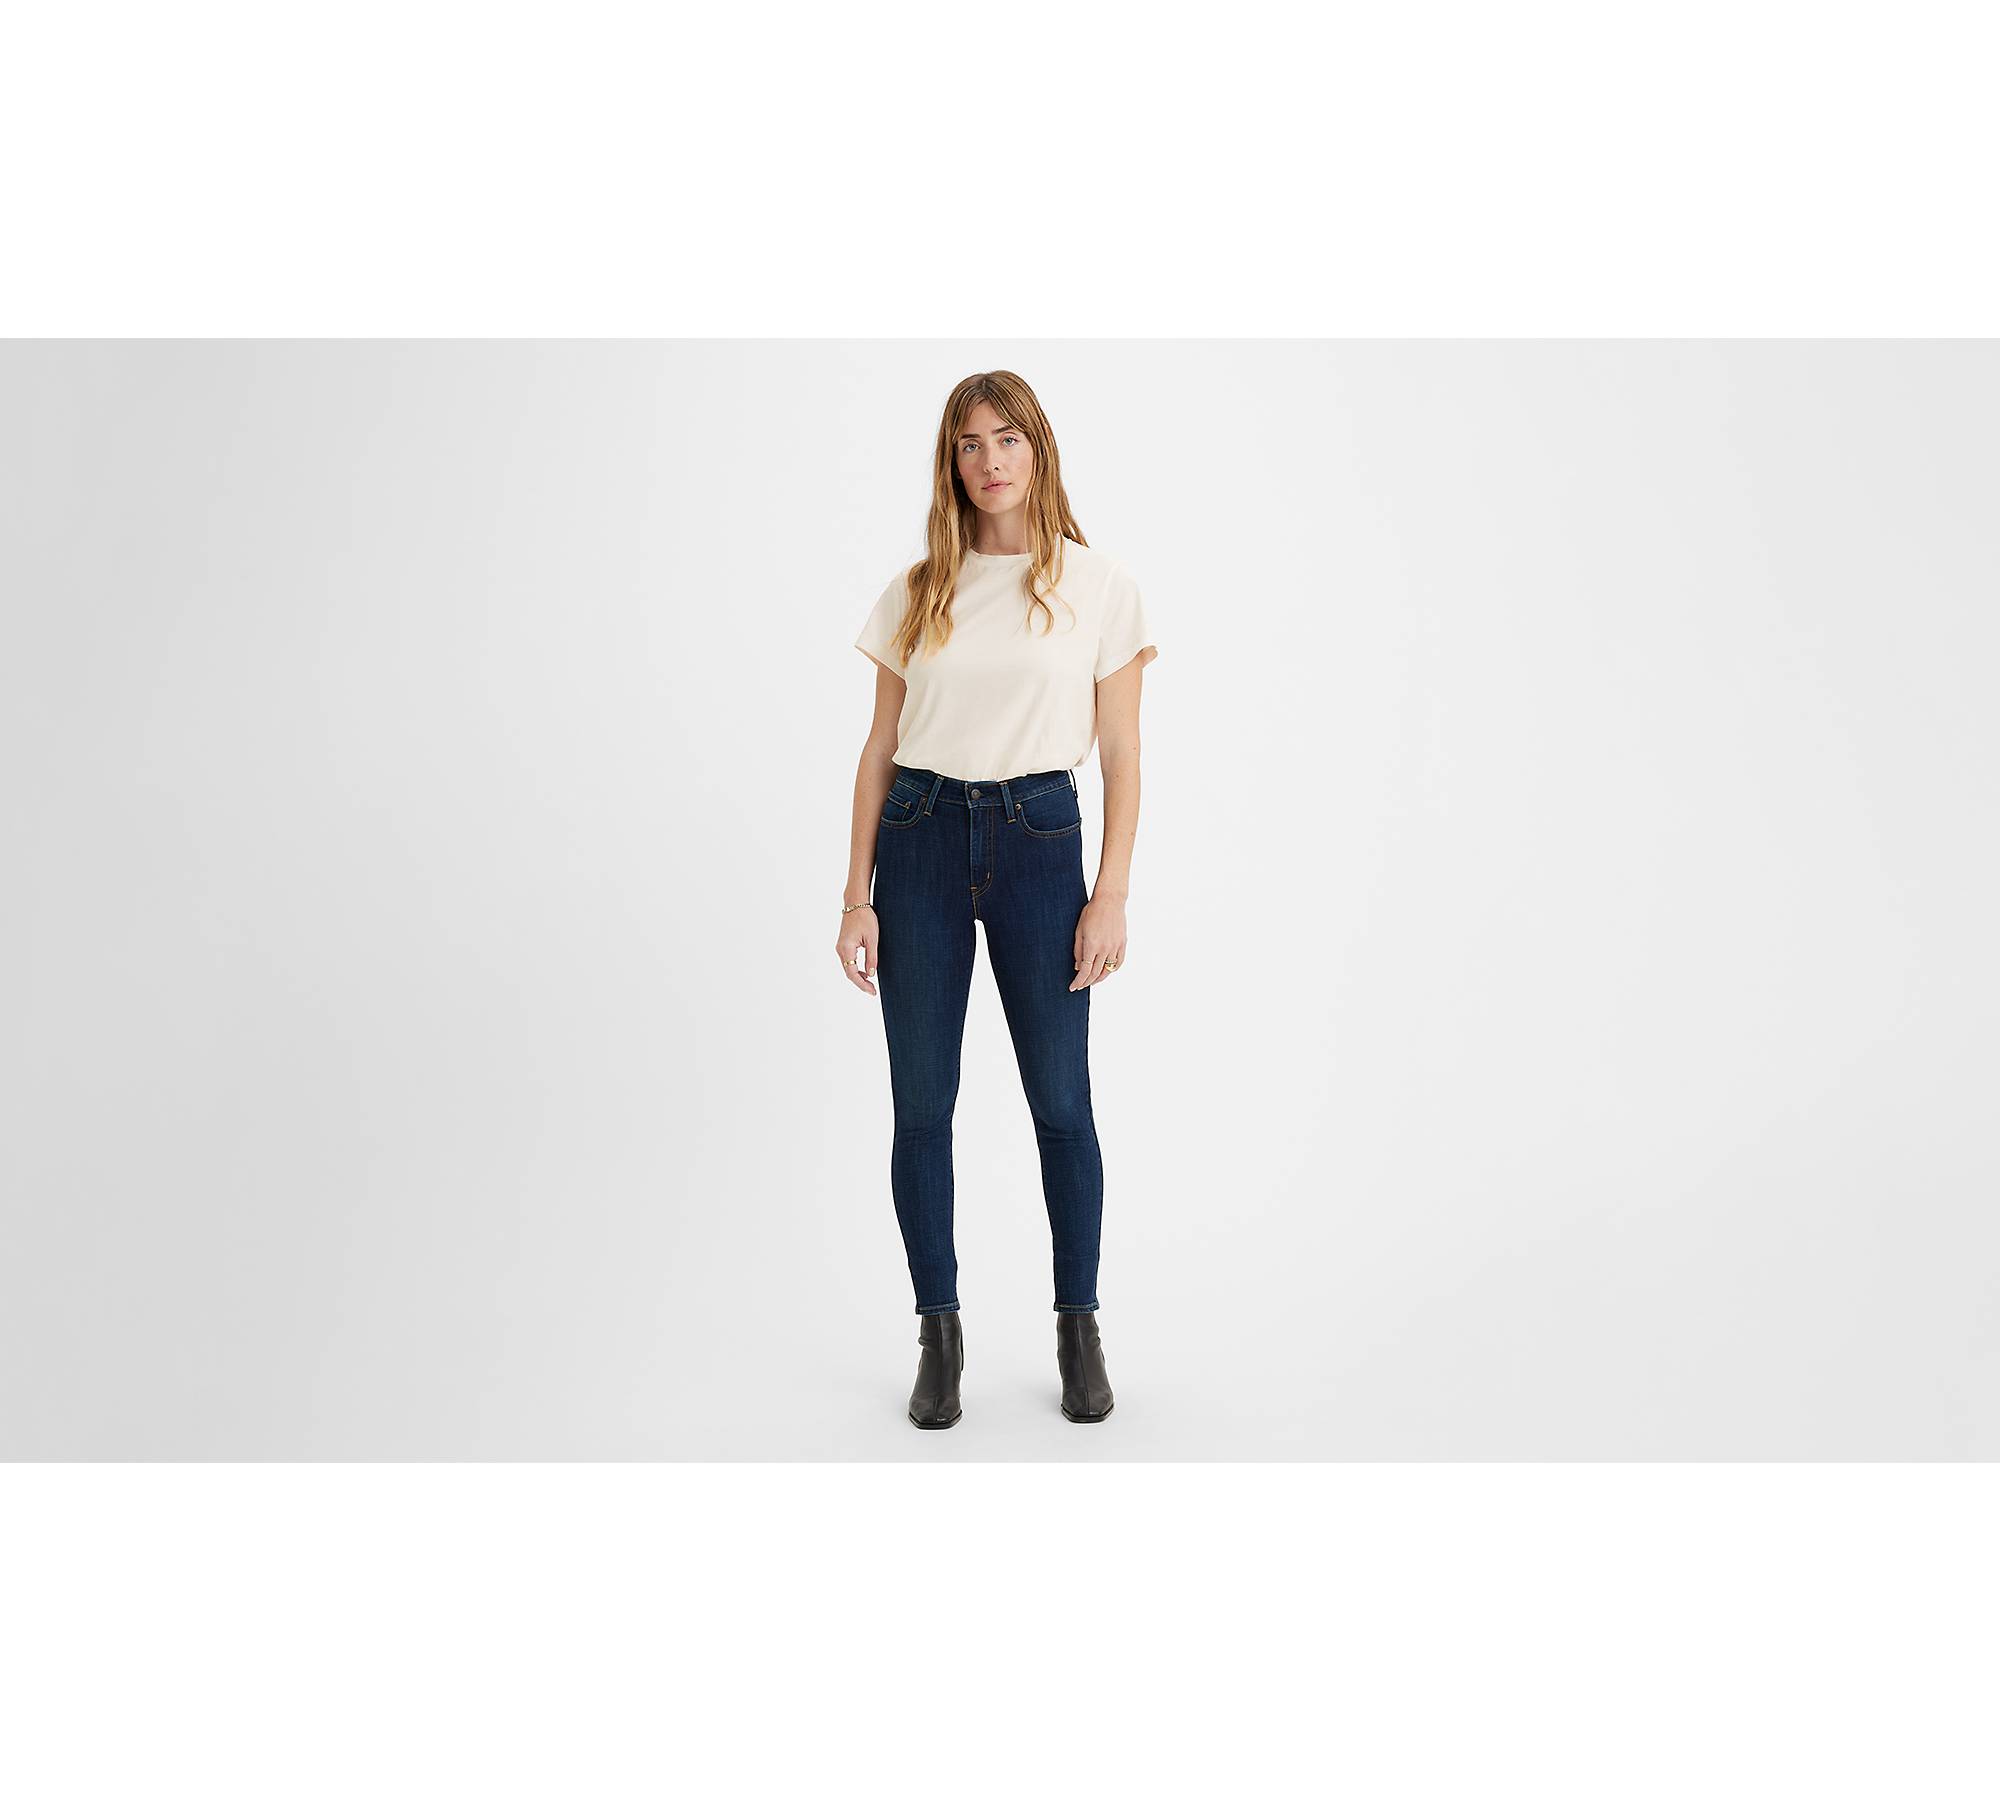 Women's High Waisted Jeggings - A New Day™ Light Blue S : Target